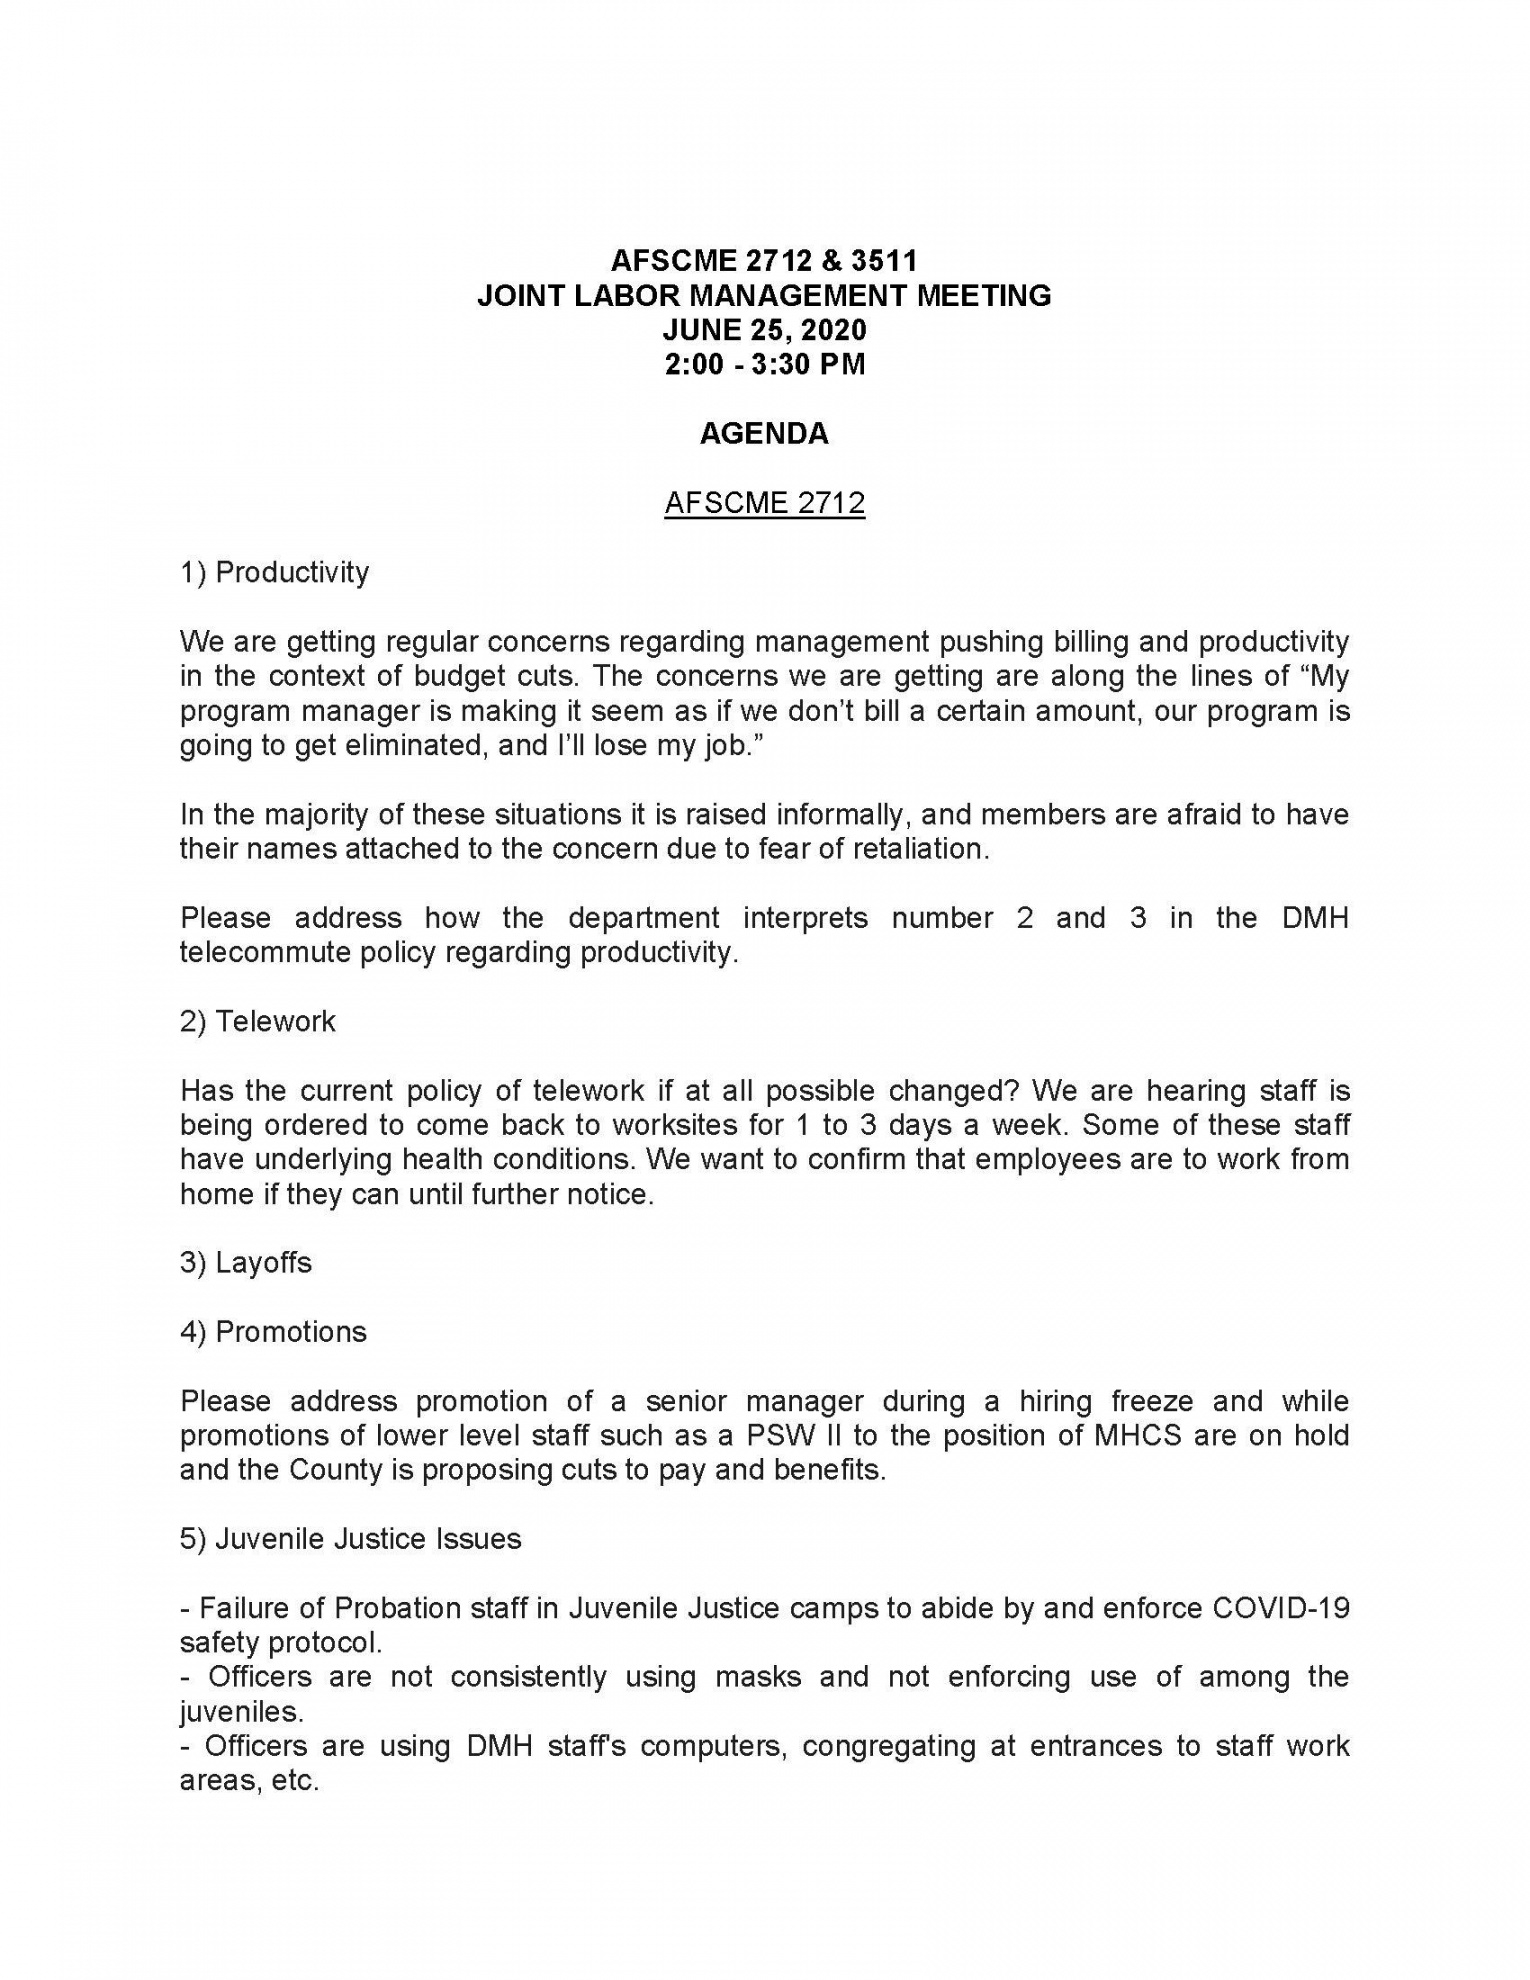 joint labor management meeting agenda  local 2712 social union meeting agenda template excel